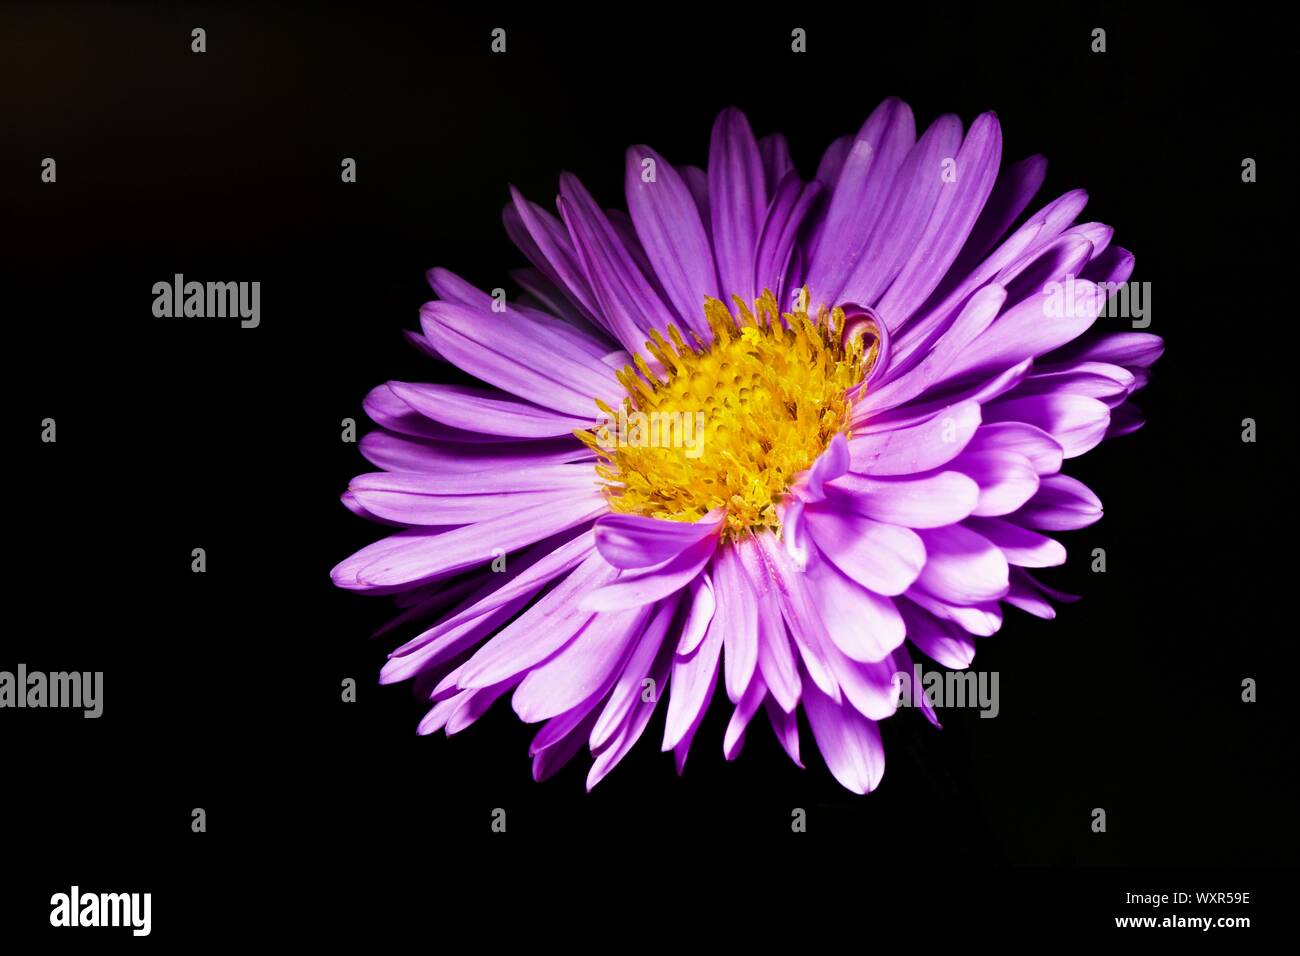 Beautiful Aster flower on a black background Stock Photo